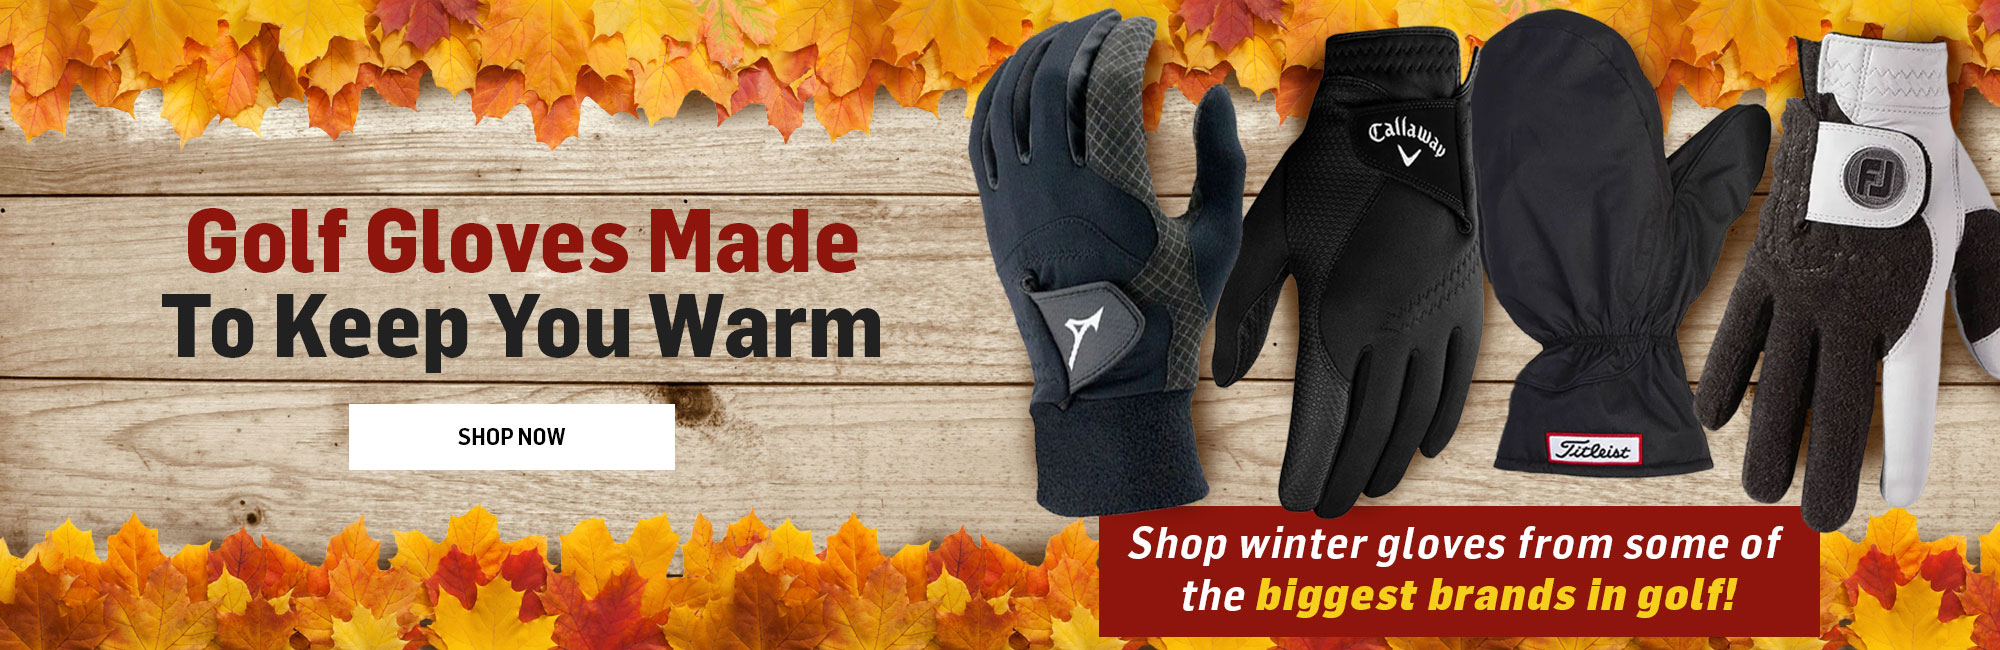 Golf Gloves Made To Keep You Warm